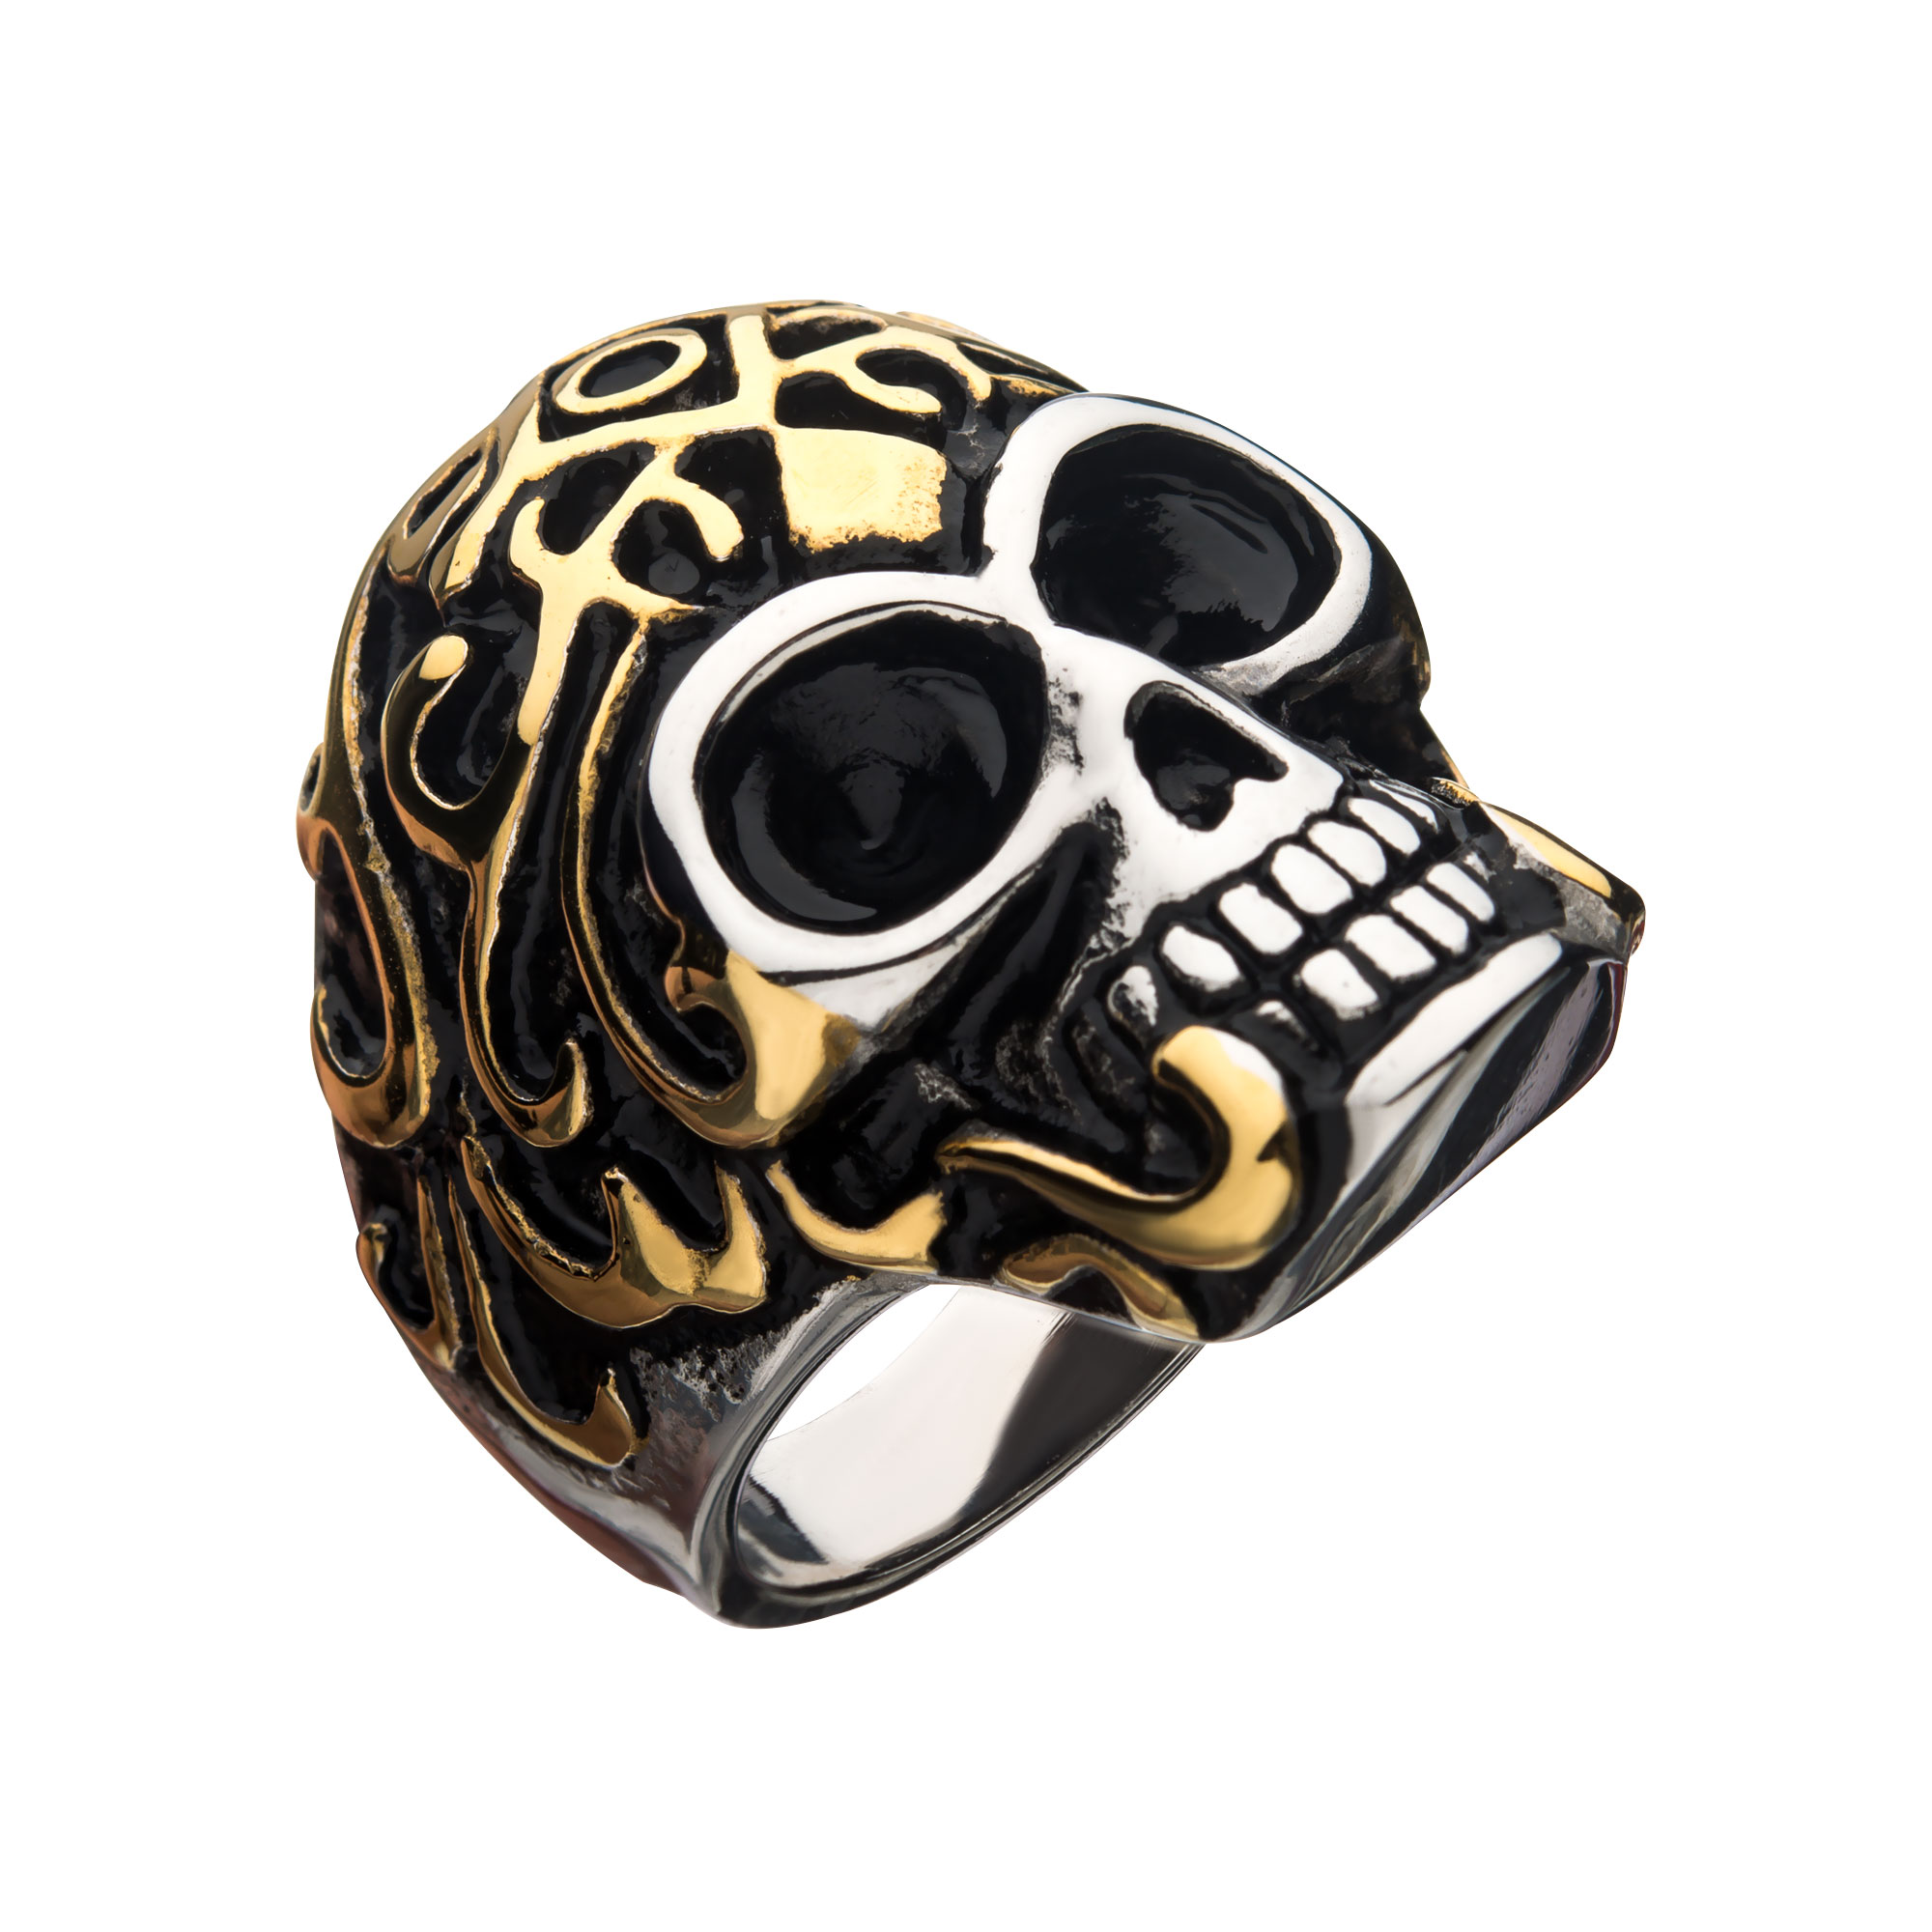 Oxidized Stainless Steel & Gold IP Skull Ring Jayson Jewelers Cape Girardeau, MO